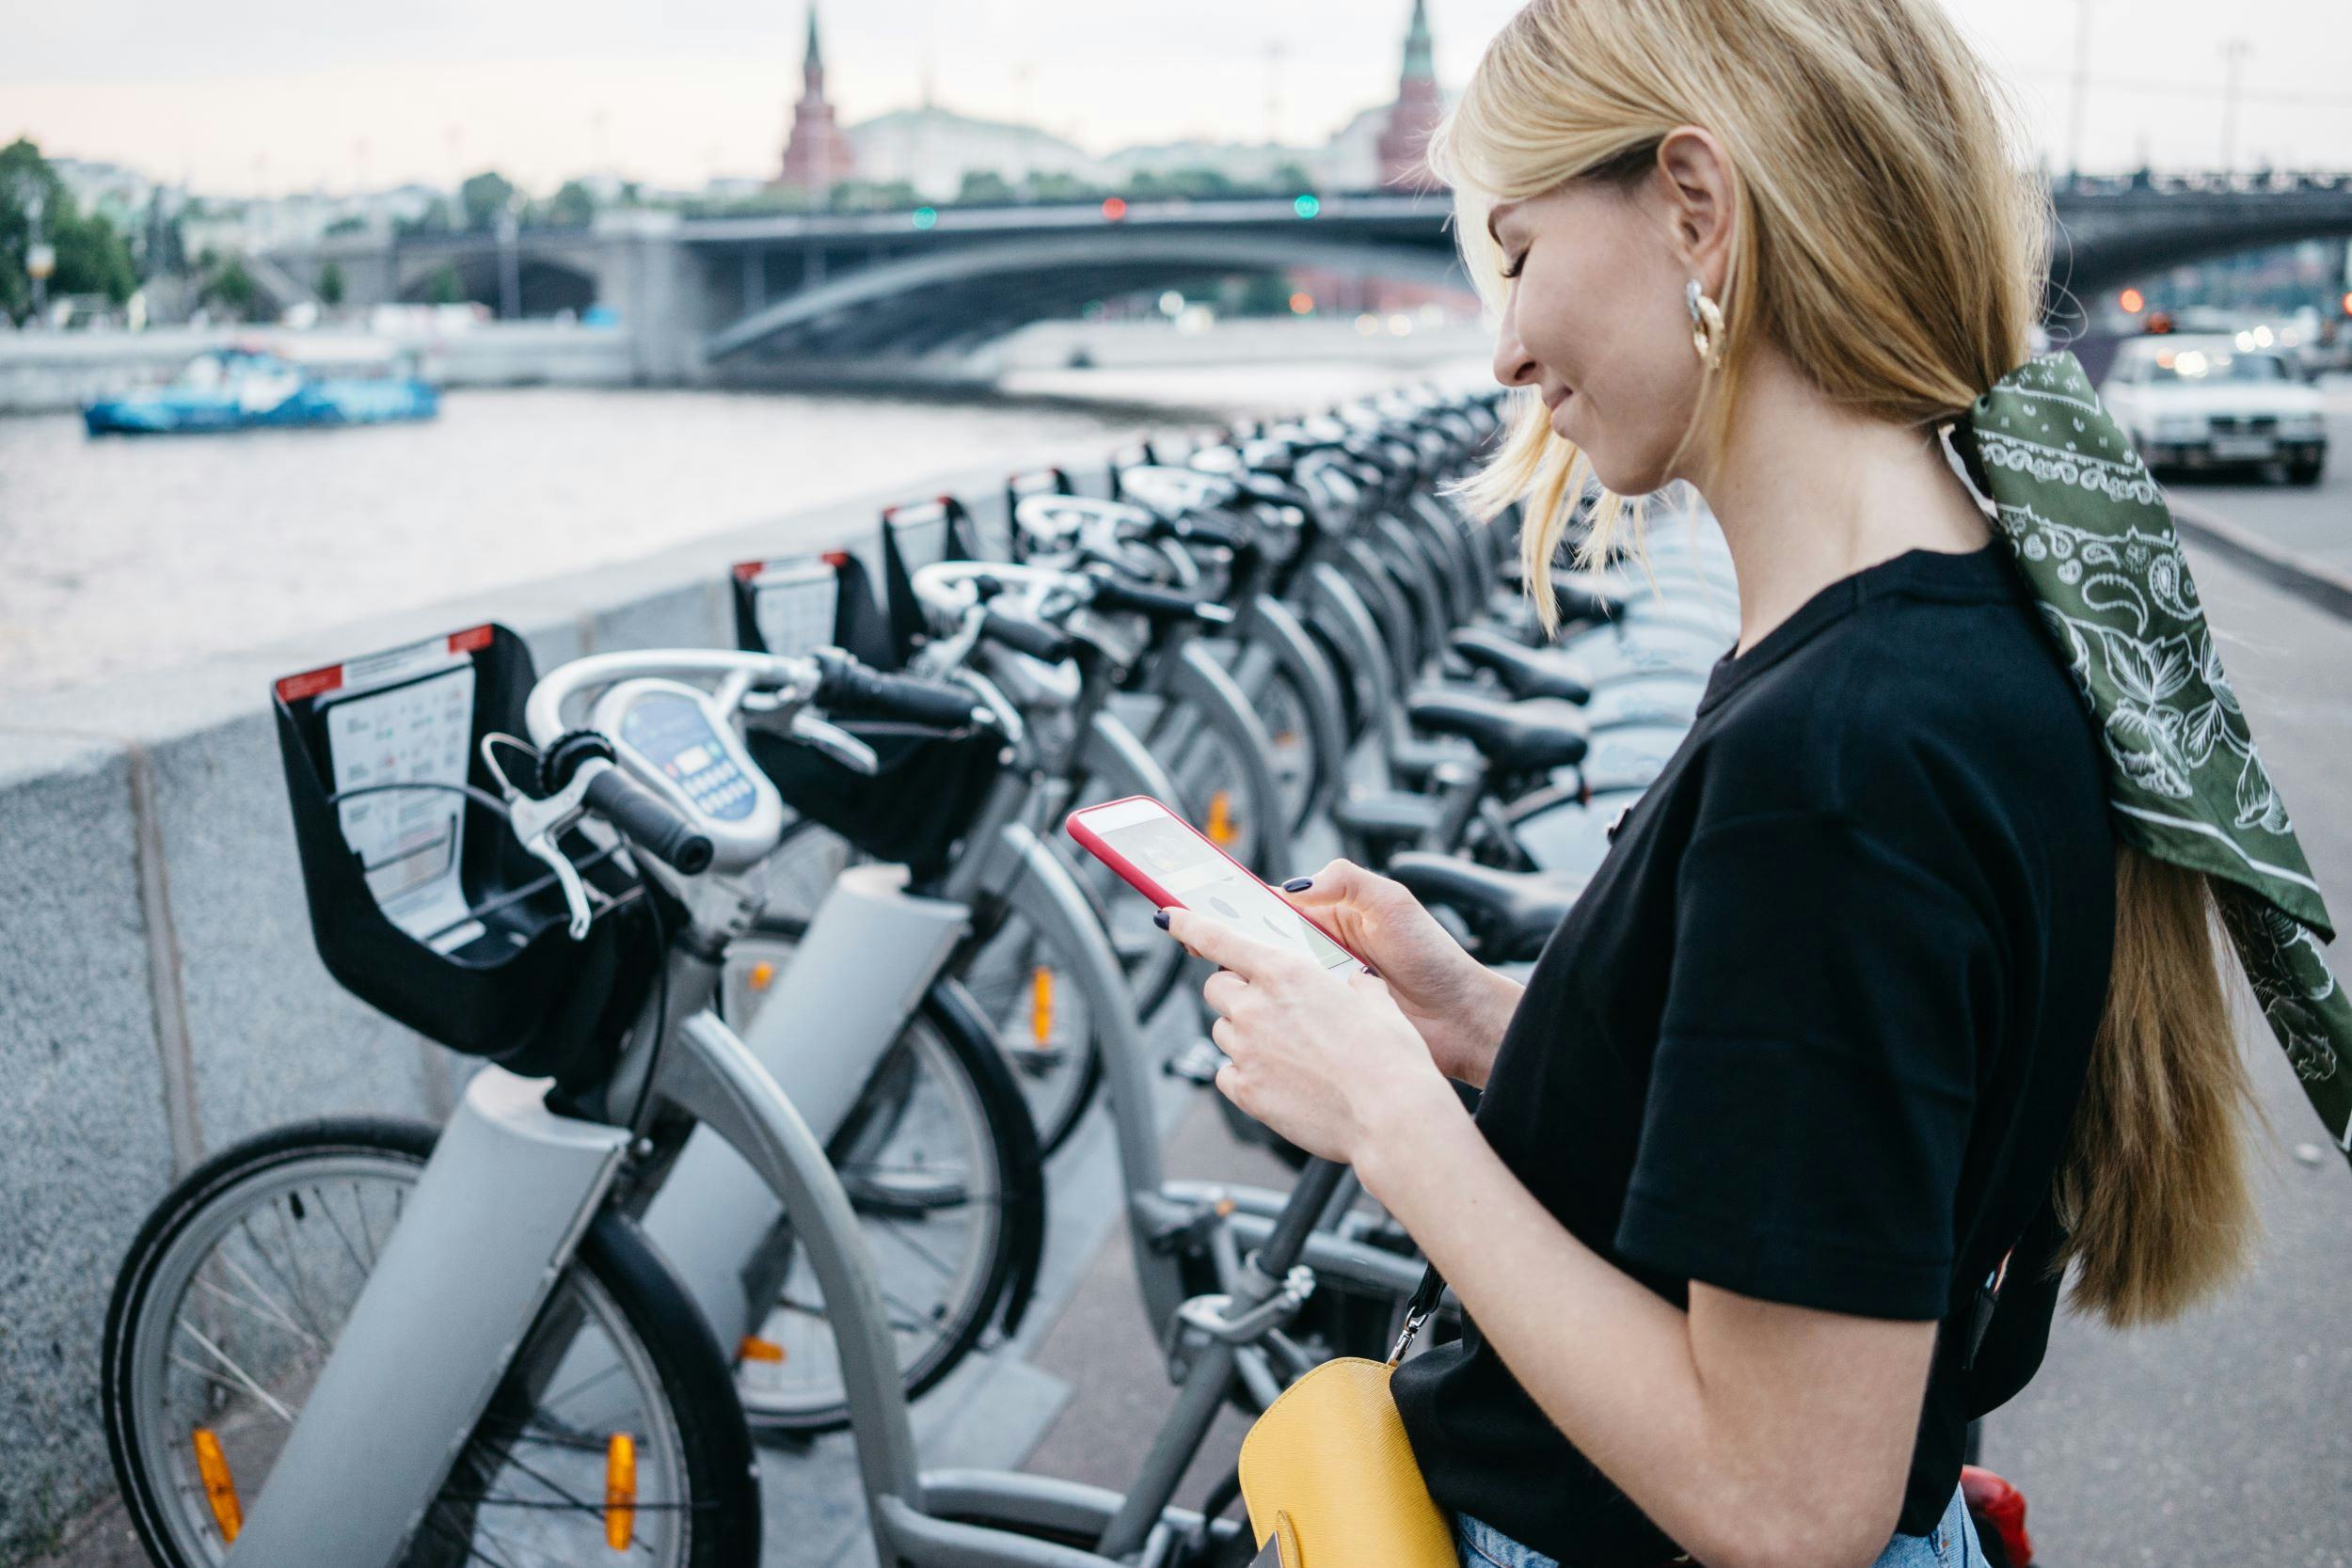 According to experts, close to 40 million shared bikes will be rolling the streets globally in the near future. – Photo Shutterstock 